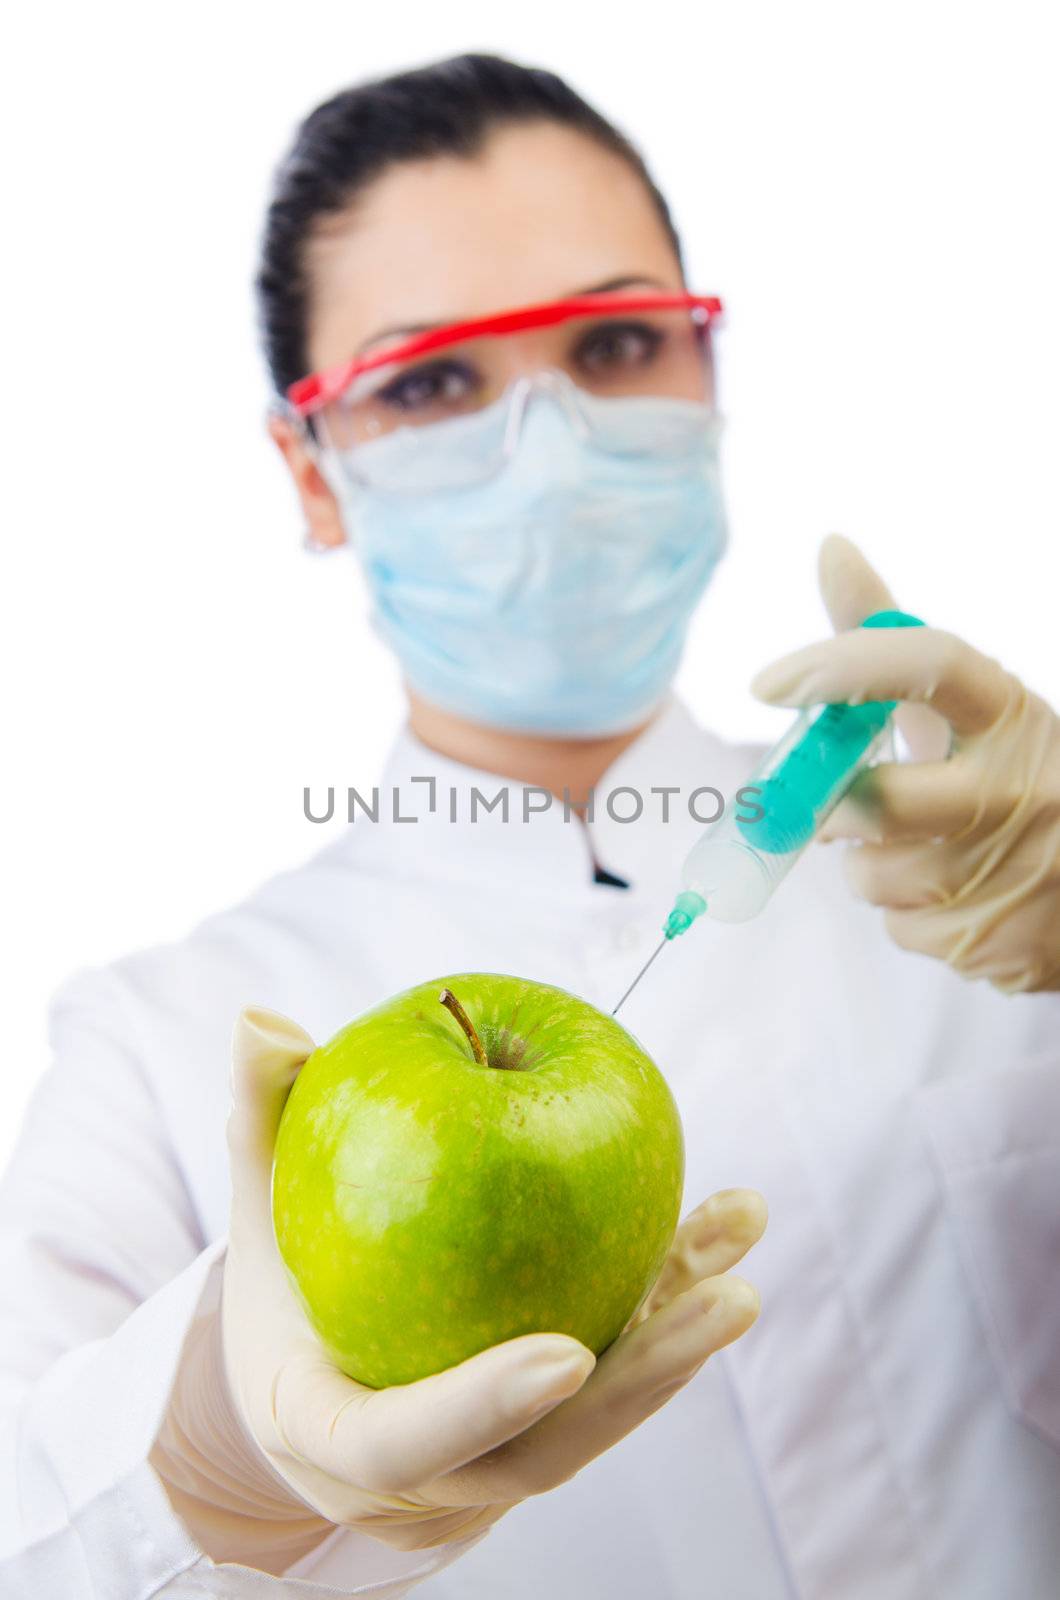 Chemical experiment with apple and syringe by Elnur